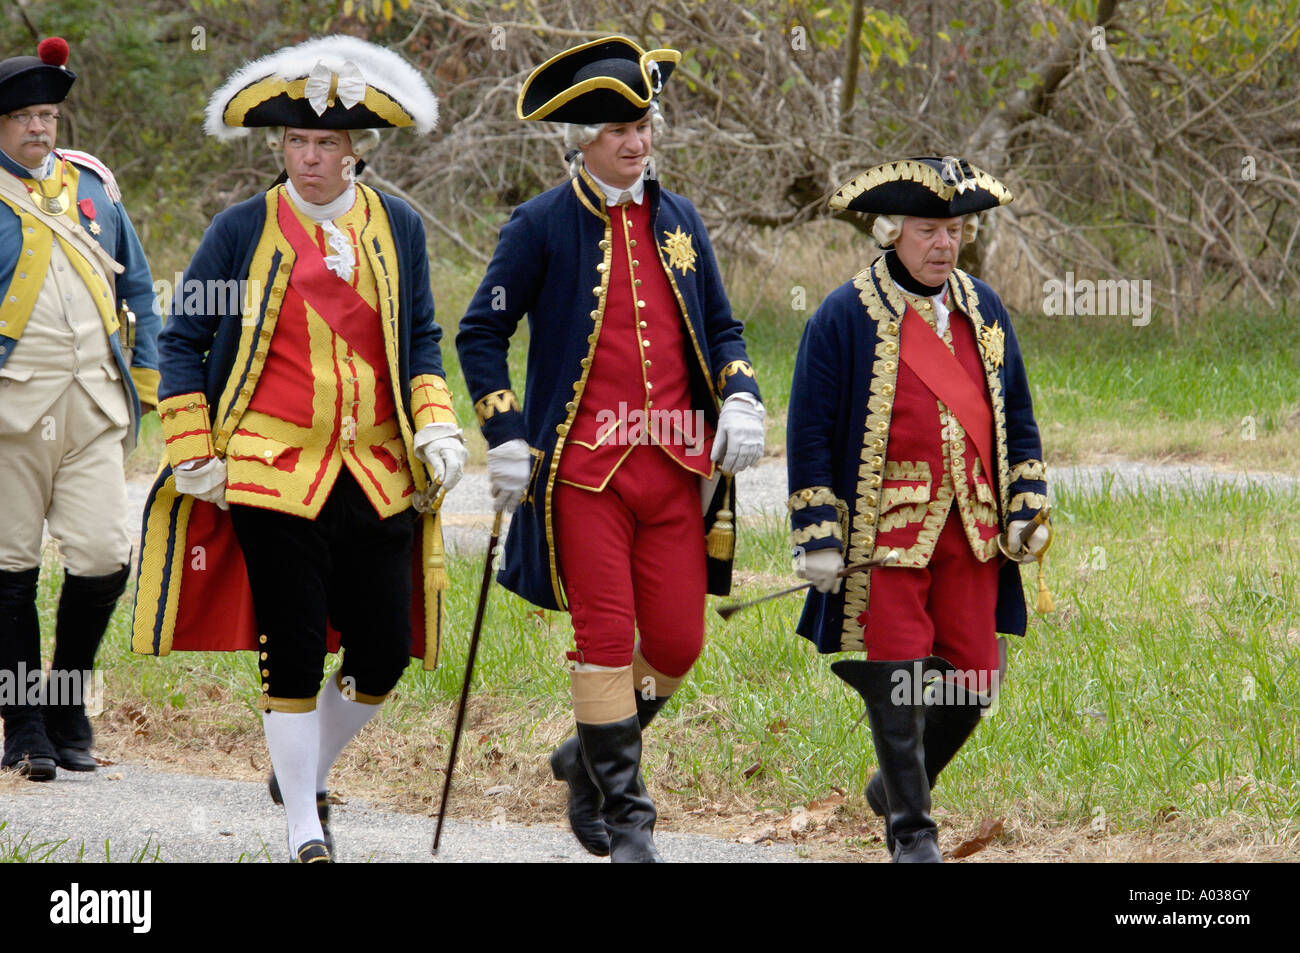 Rochambeau Washington and other allied officer reenactors march to the surrender ceremony at Yorktown Virginia. Digital photograph Stock Photo